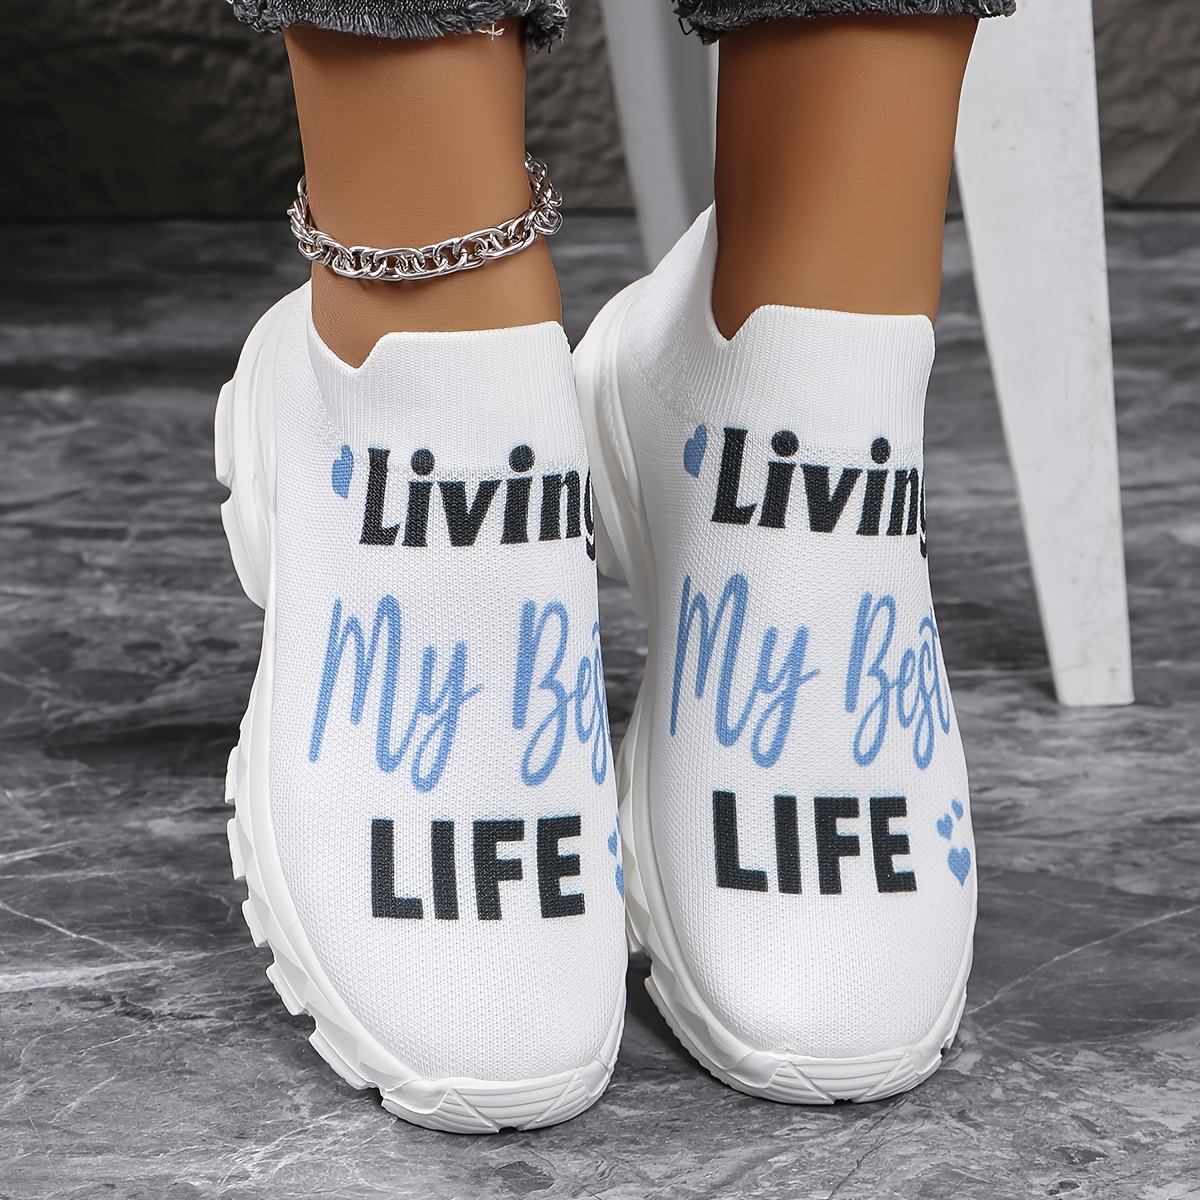 

Women's Letter Slip On Sneakers, Platform Slip On Soft Sole Walking Shoes, Low-top Breathable Knitted Shoes